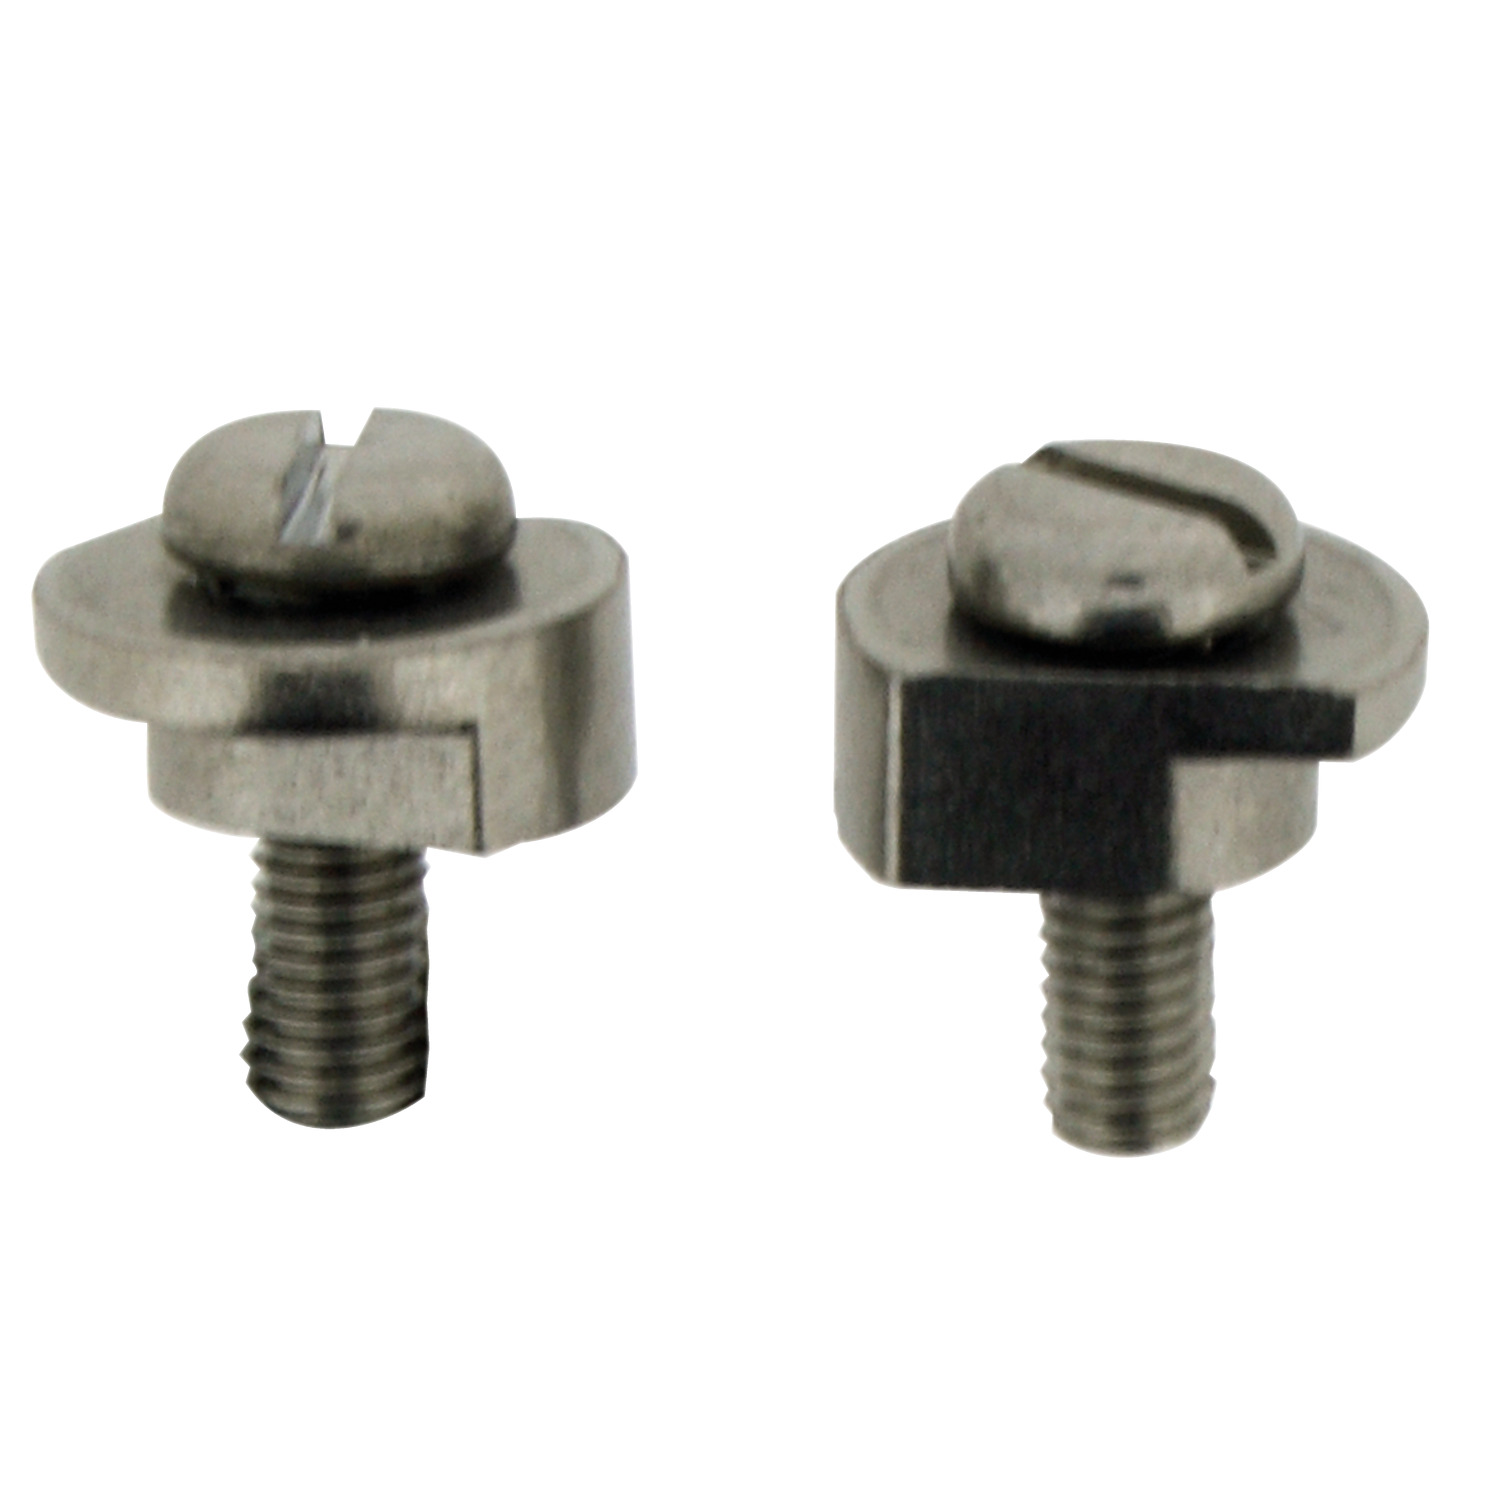 P0292 Clamp Cleats